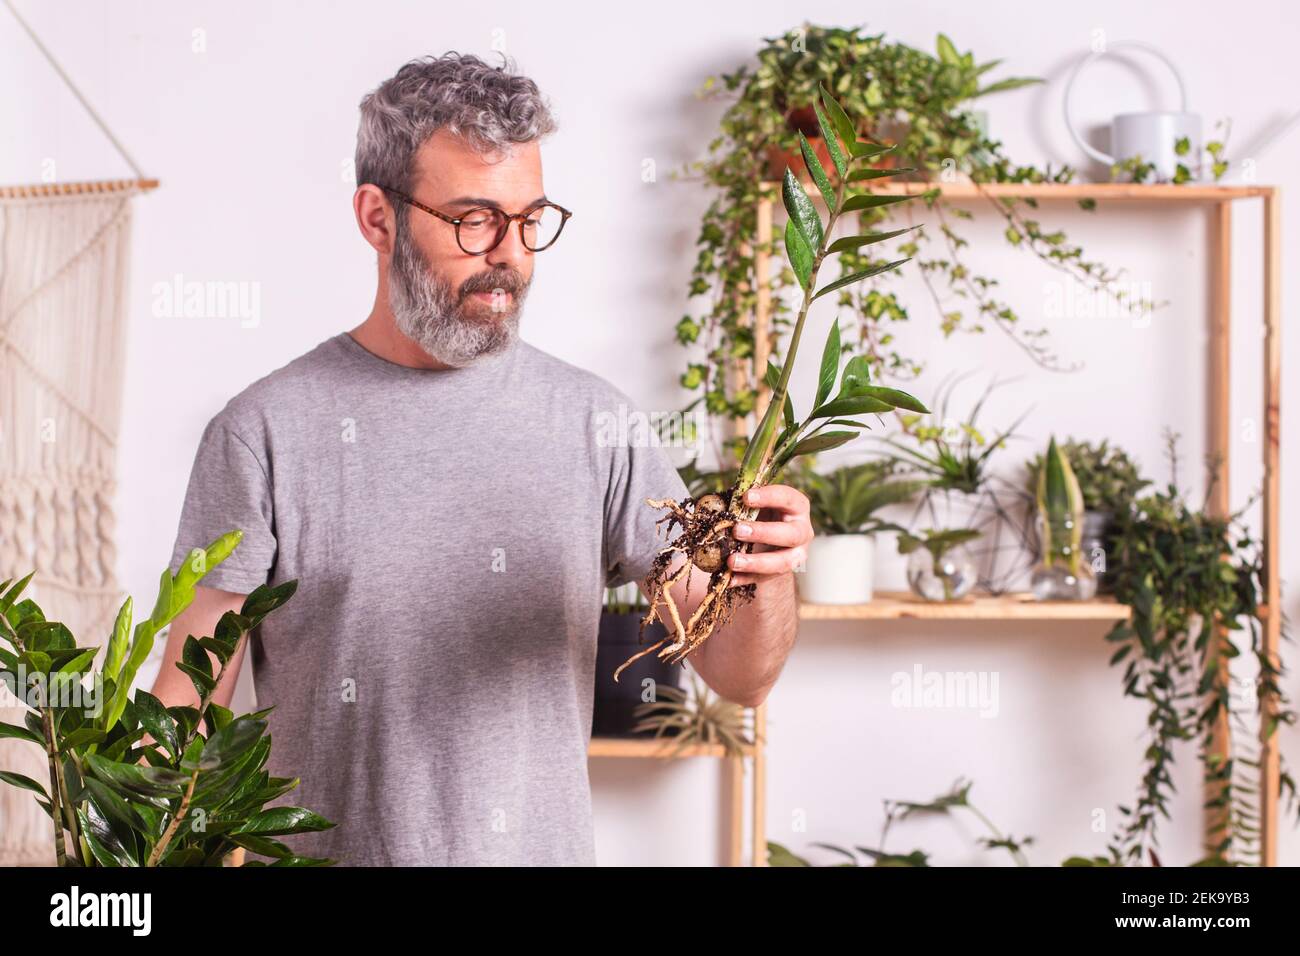 Mature man wearing eyeglasses checking roots of Zamioculcas Zamiifolia plant while standing at home Stock Photo